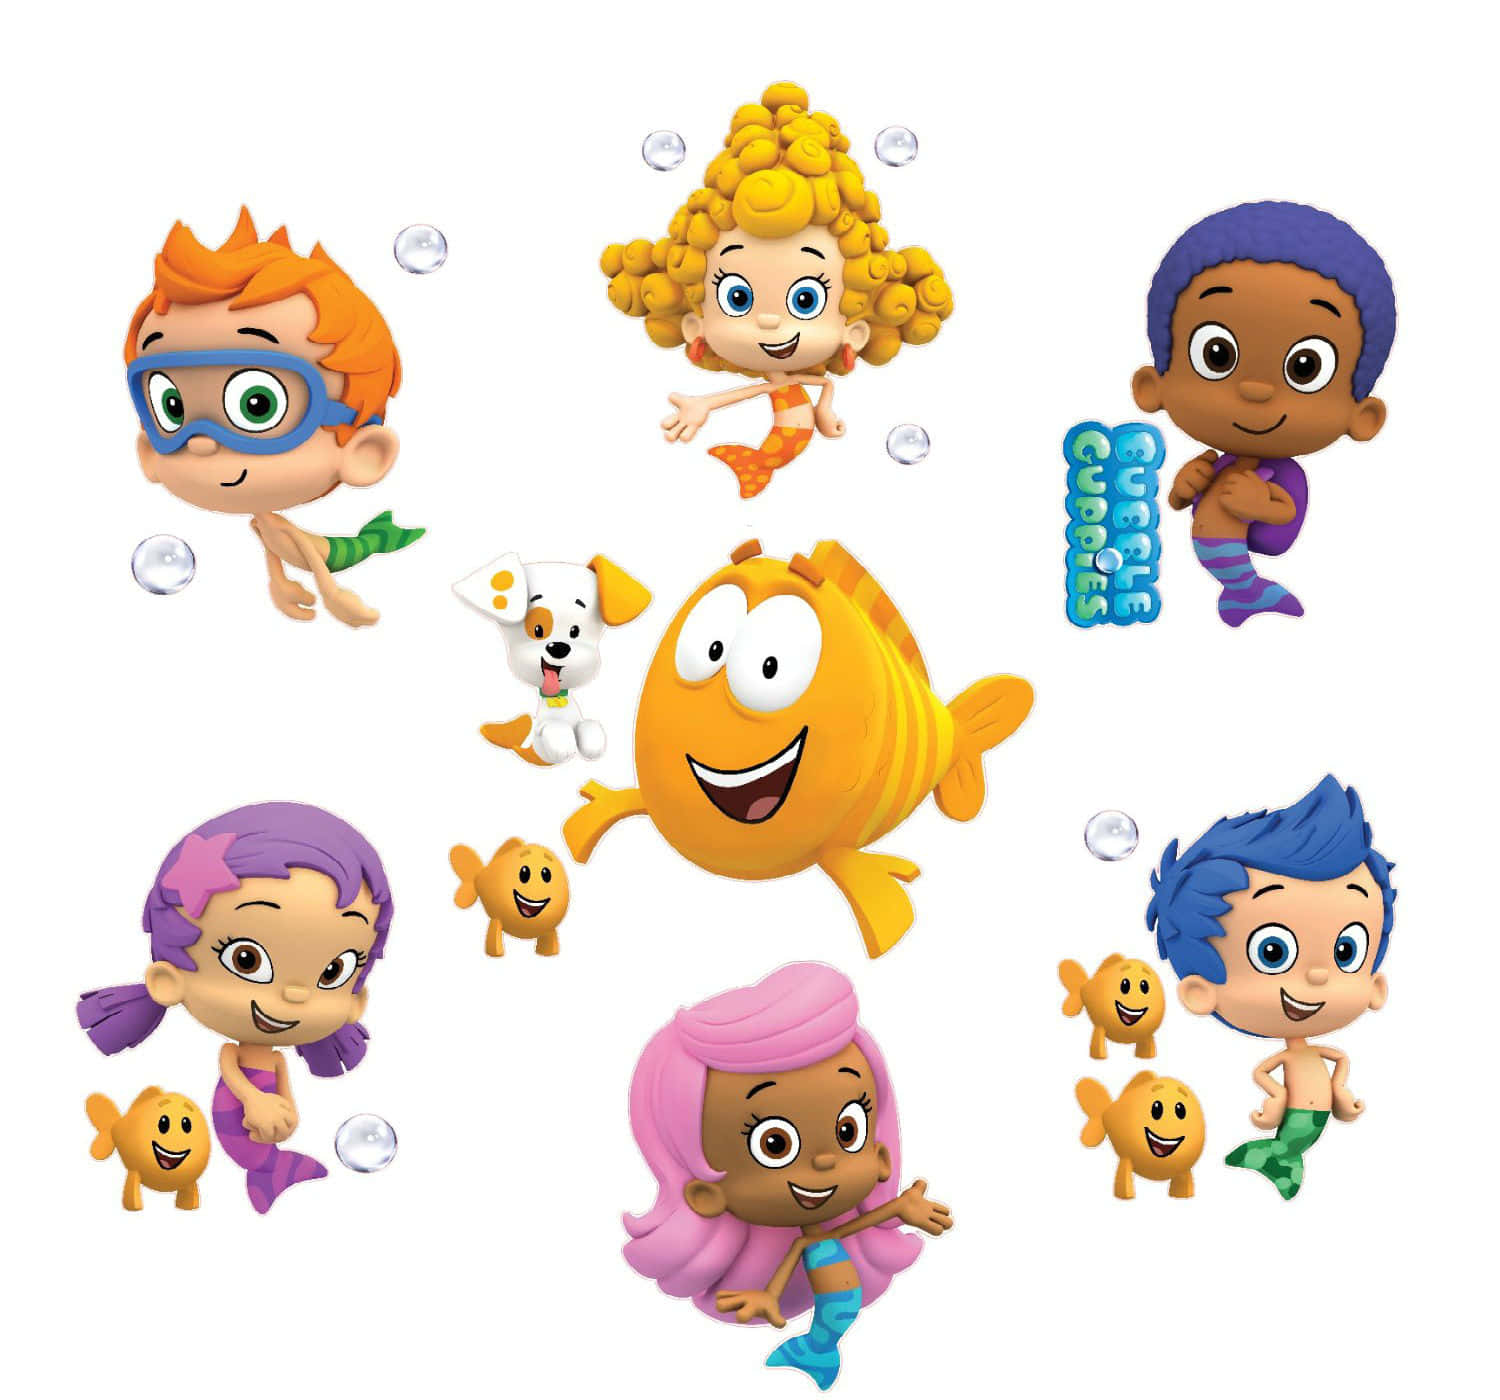 Enjoying a Glittery Day Out with Bubble Guppies